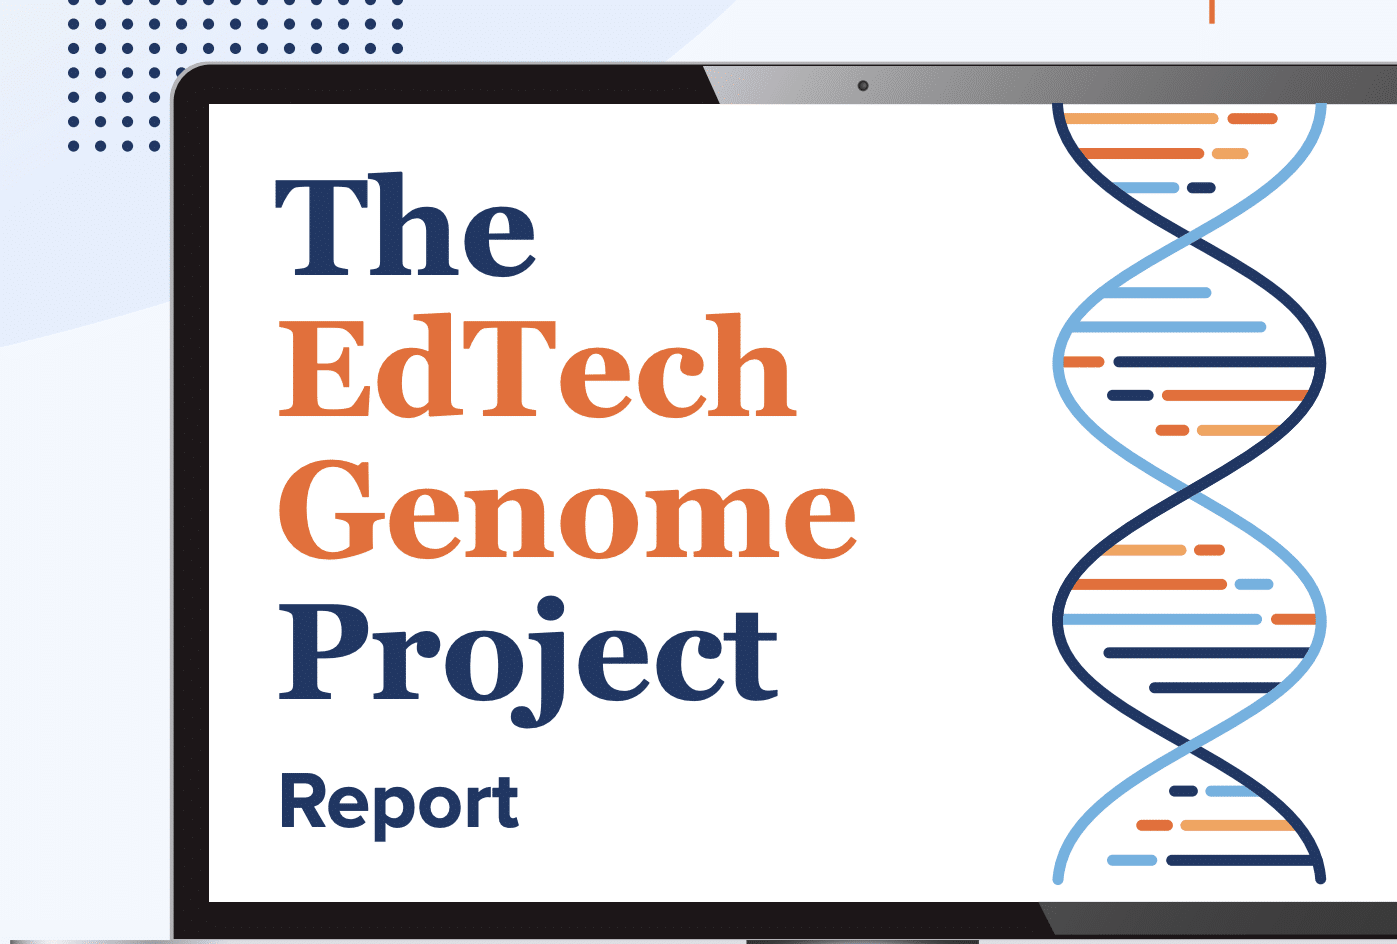 The edtech genome project report